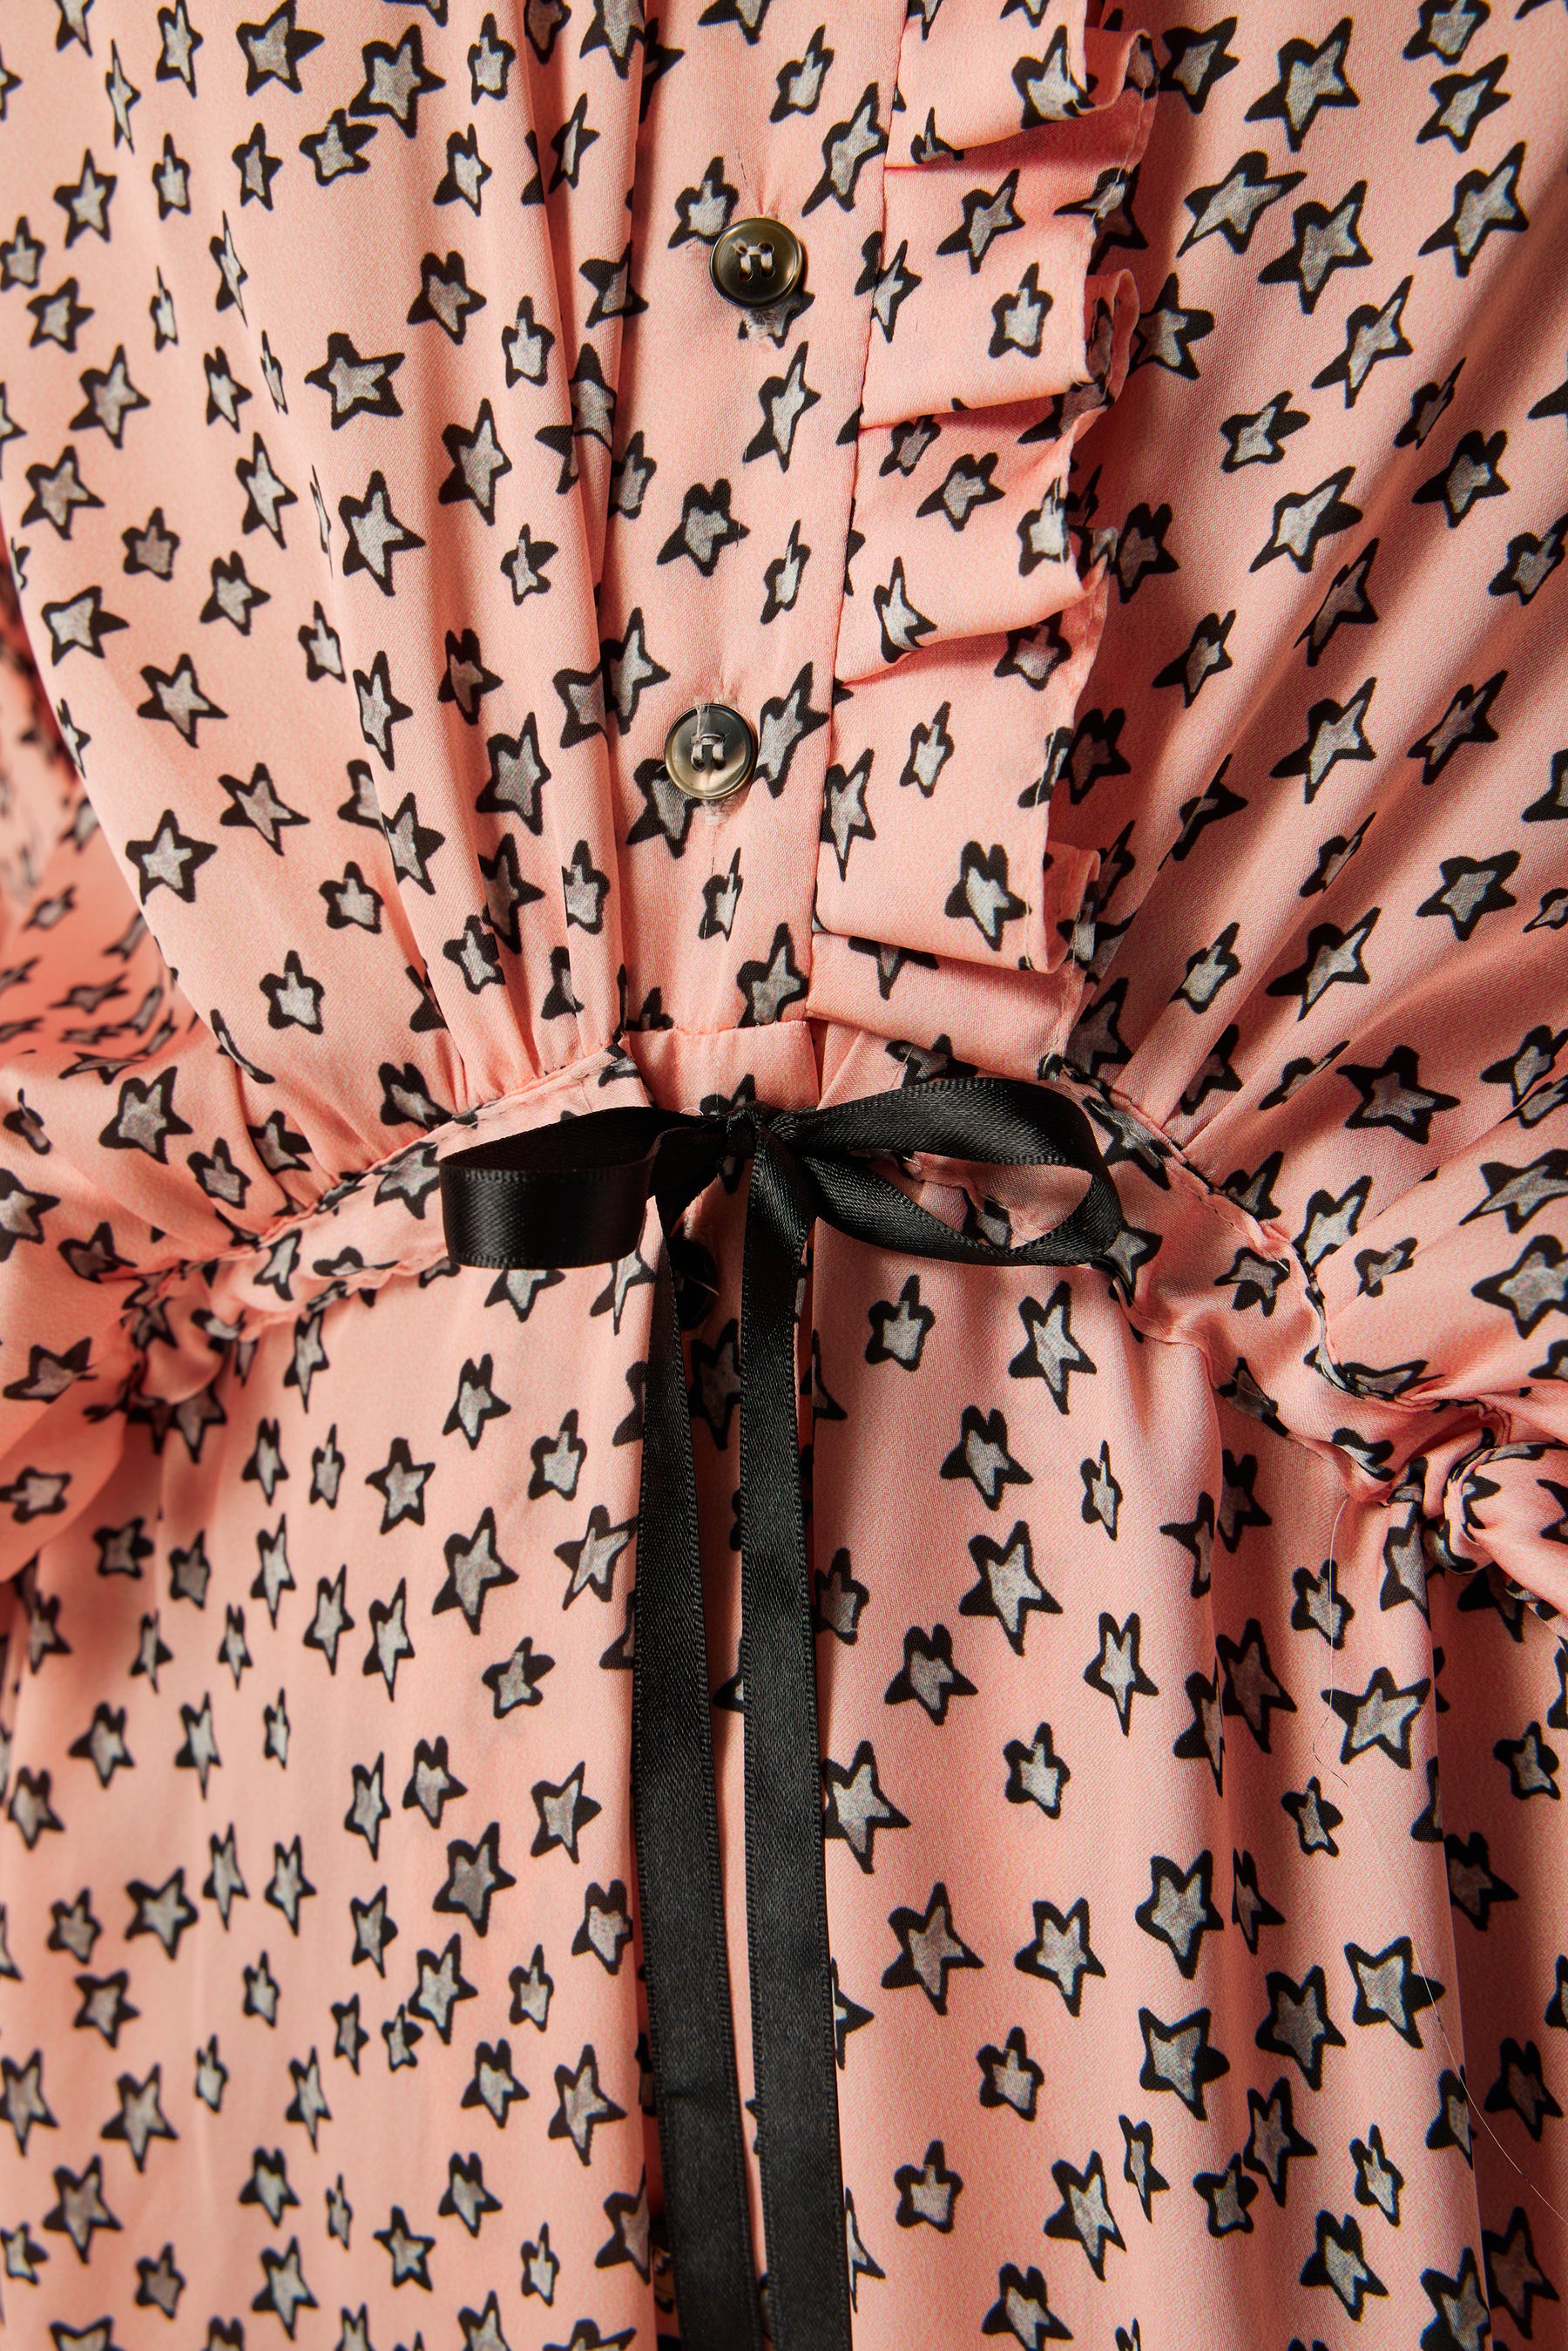 Gil jumpsuit in pink Messy Stars print